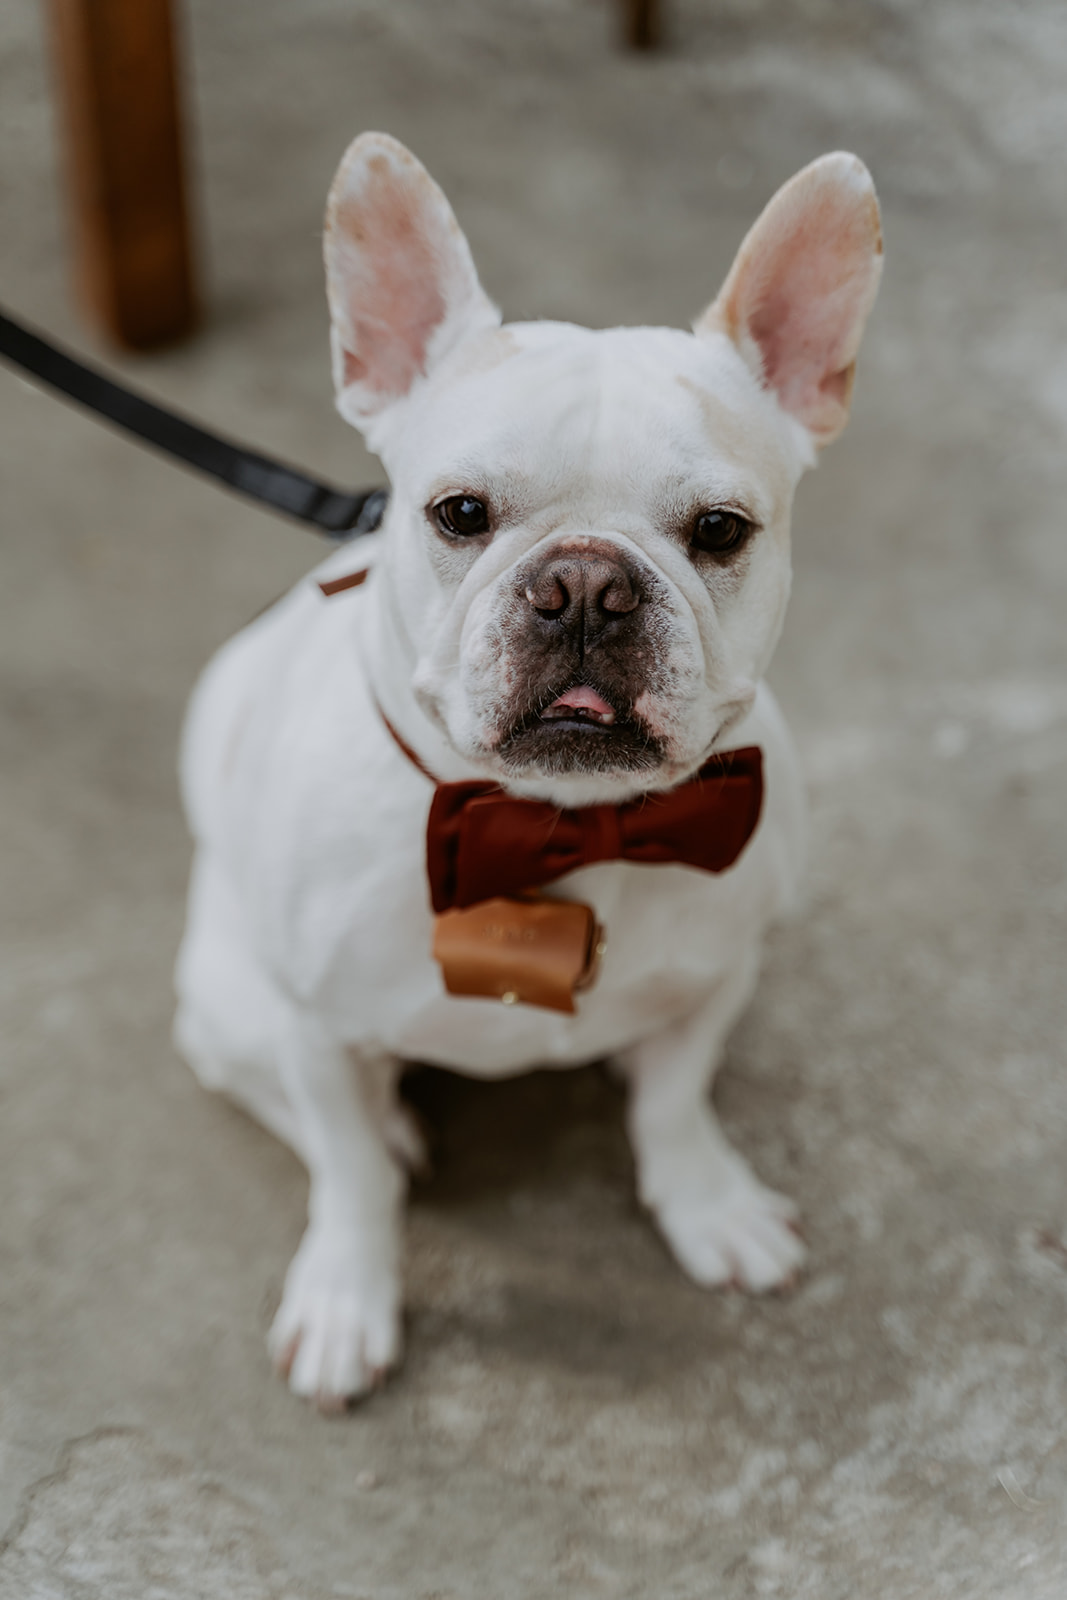 A white french bulldog wearing a bow tie sits attentively on a leash, looking directly at the camera.